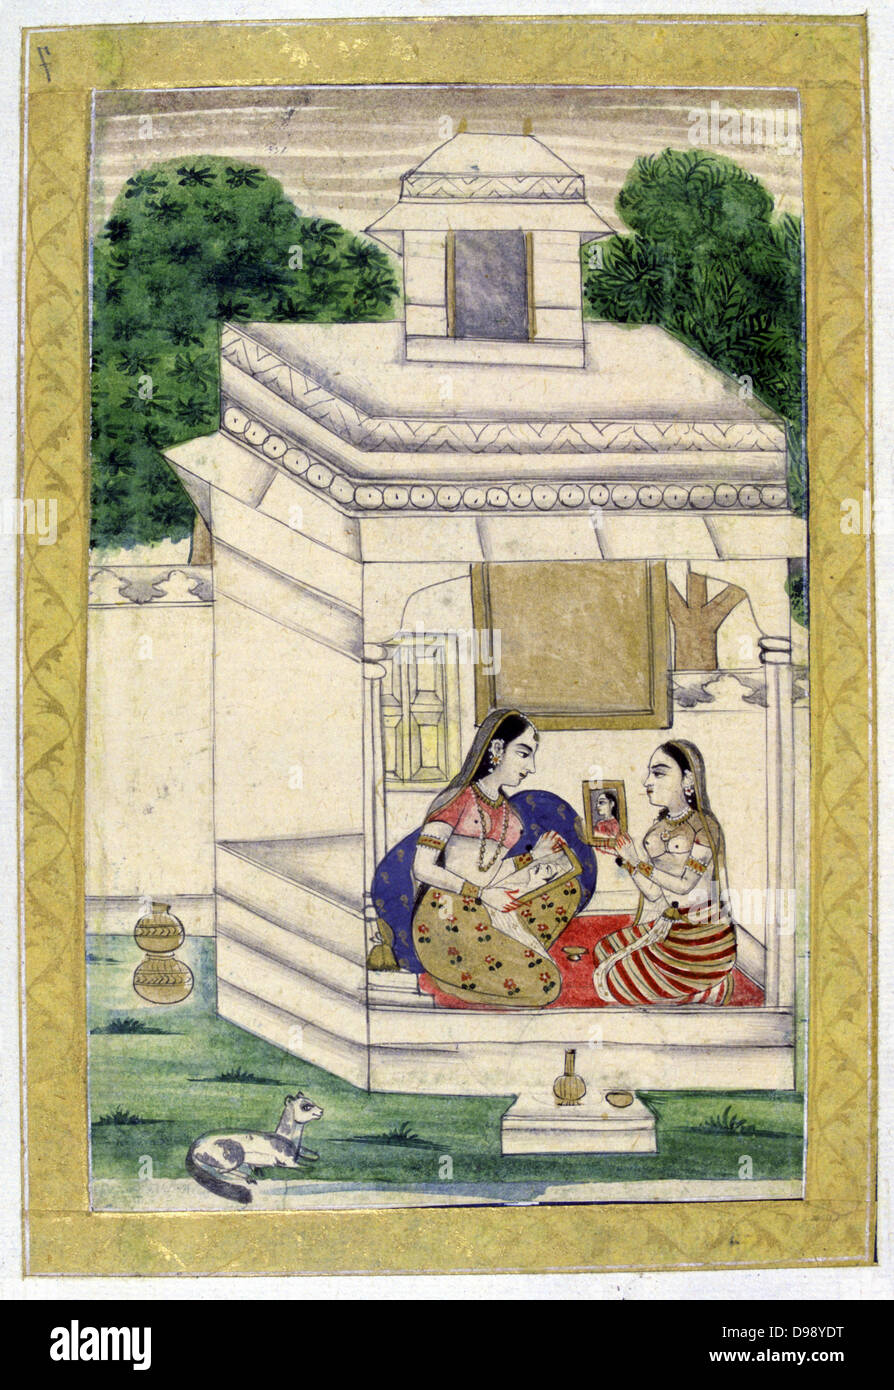 Album of Ragamala. Young woman with a portait of her absent lover. Servant holds up portrait of her mistress (to be sent to absent lover?). 19th century Indian miniature, Rajasthan School. Stock Photo